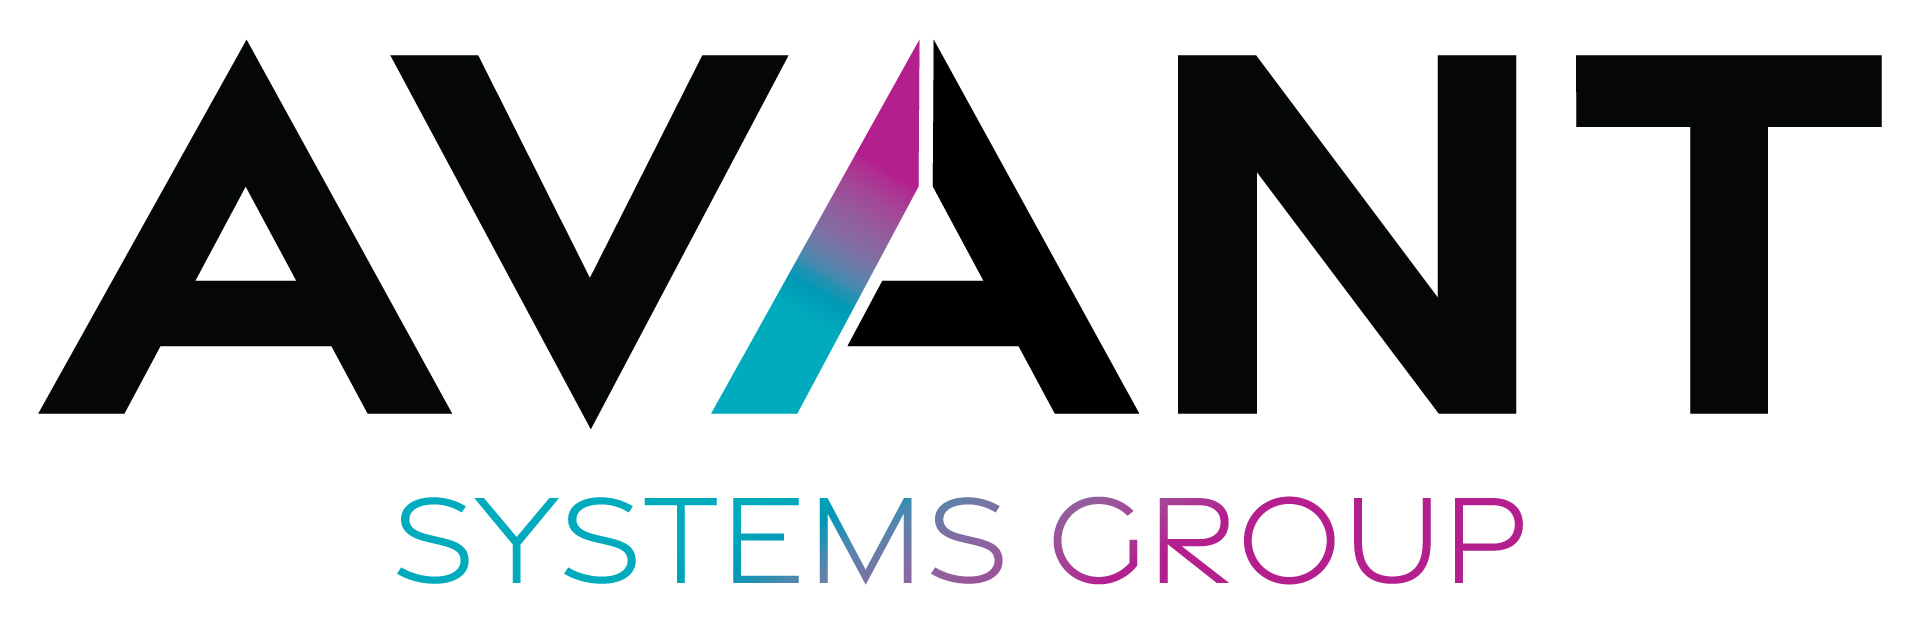 Avant systems group のロゴ